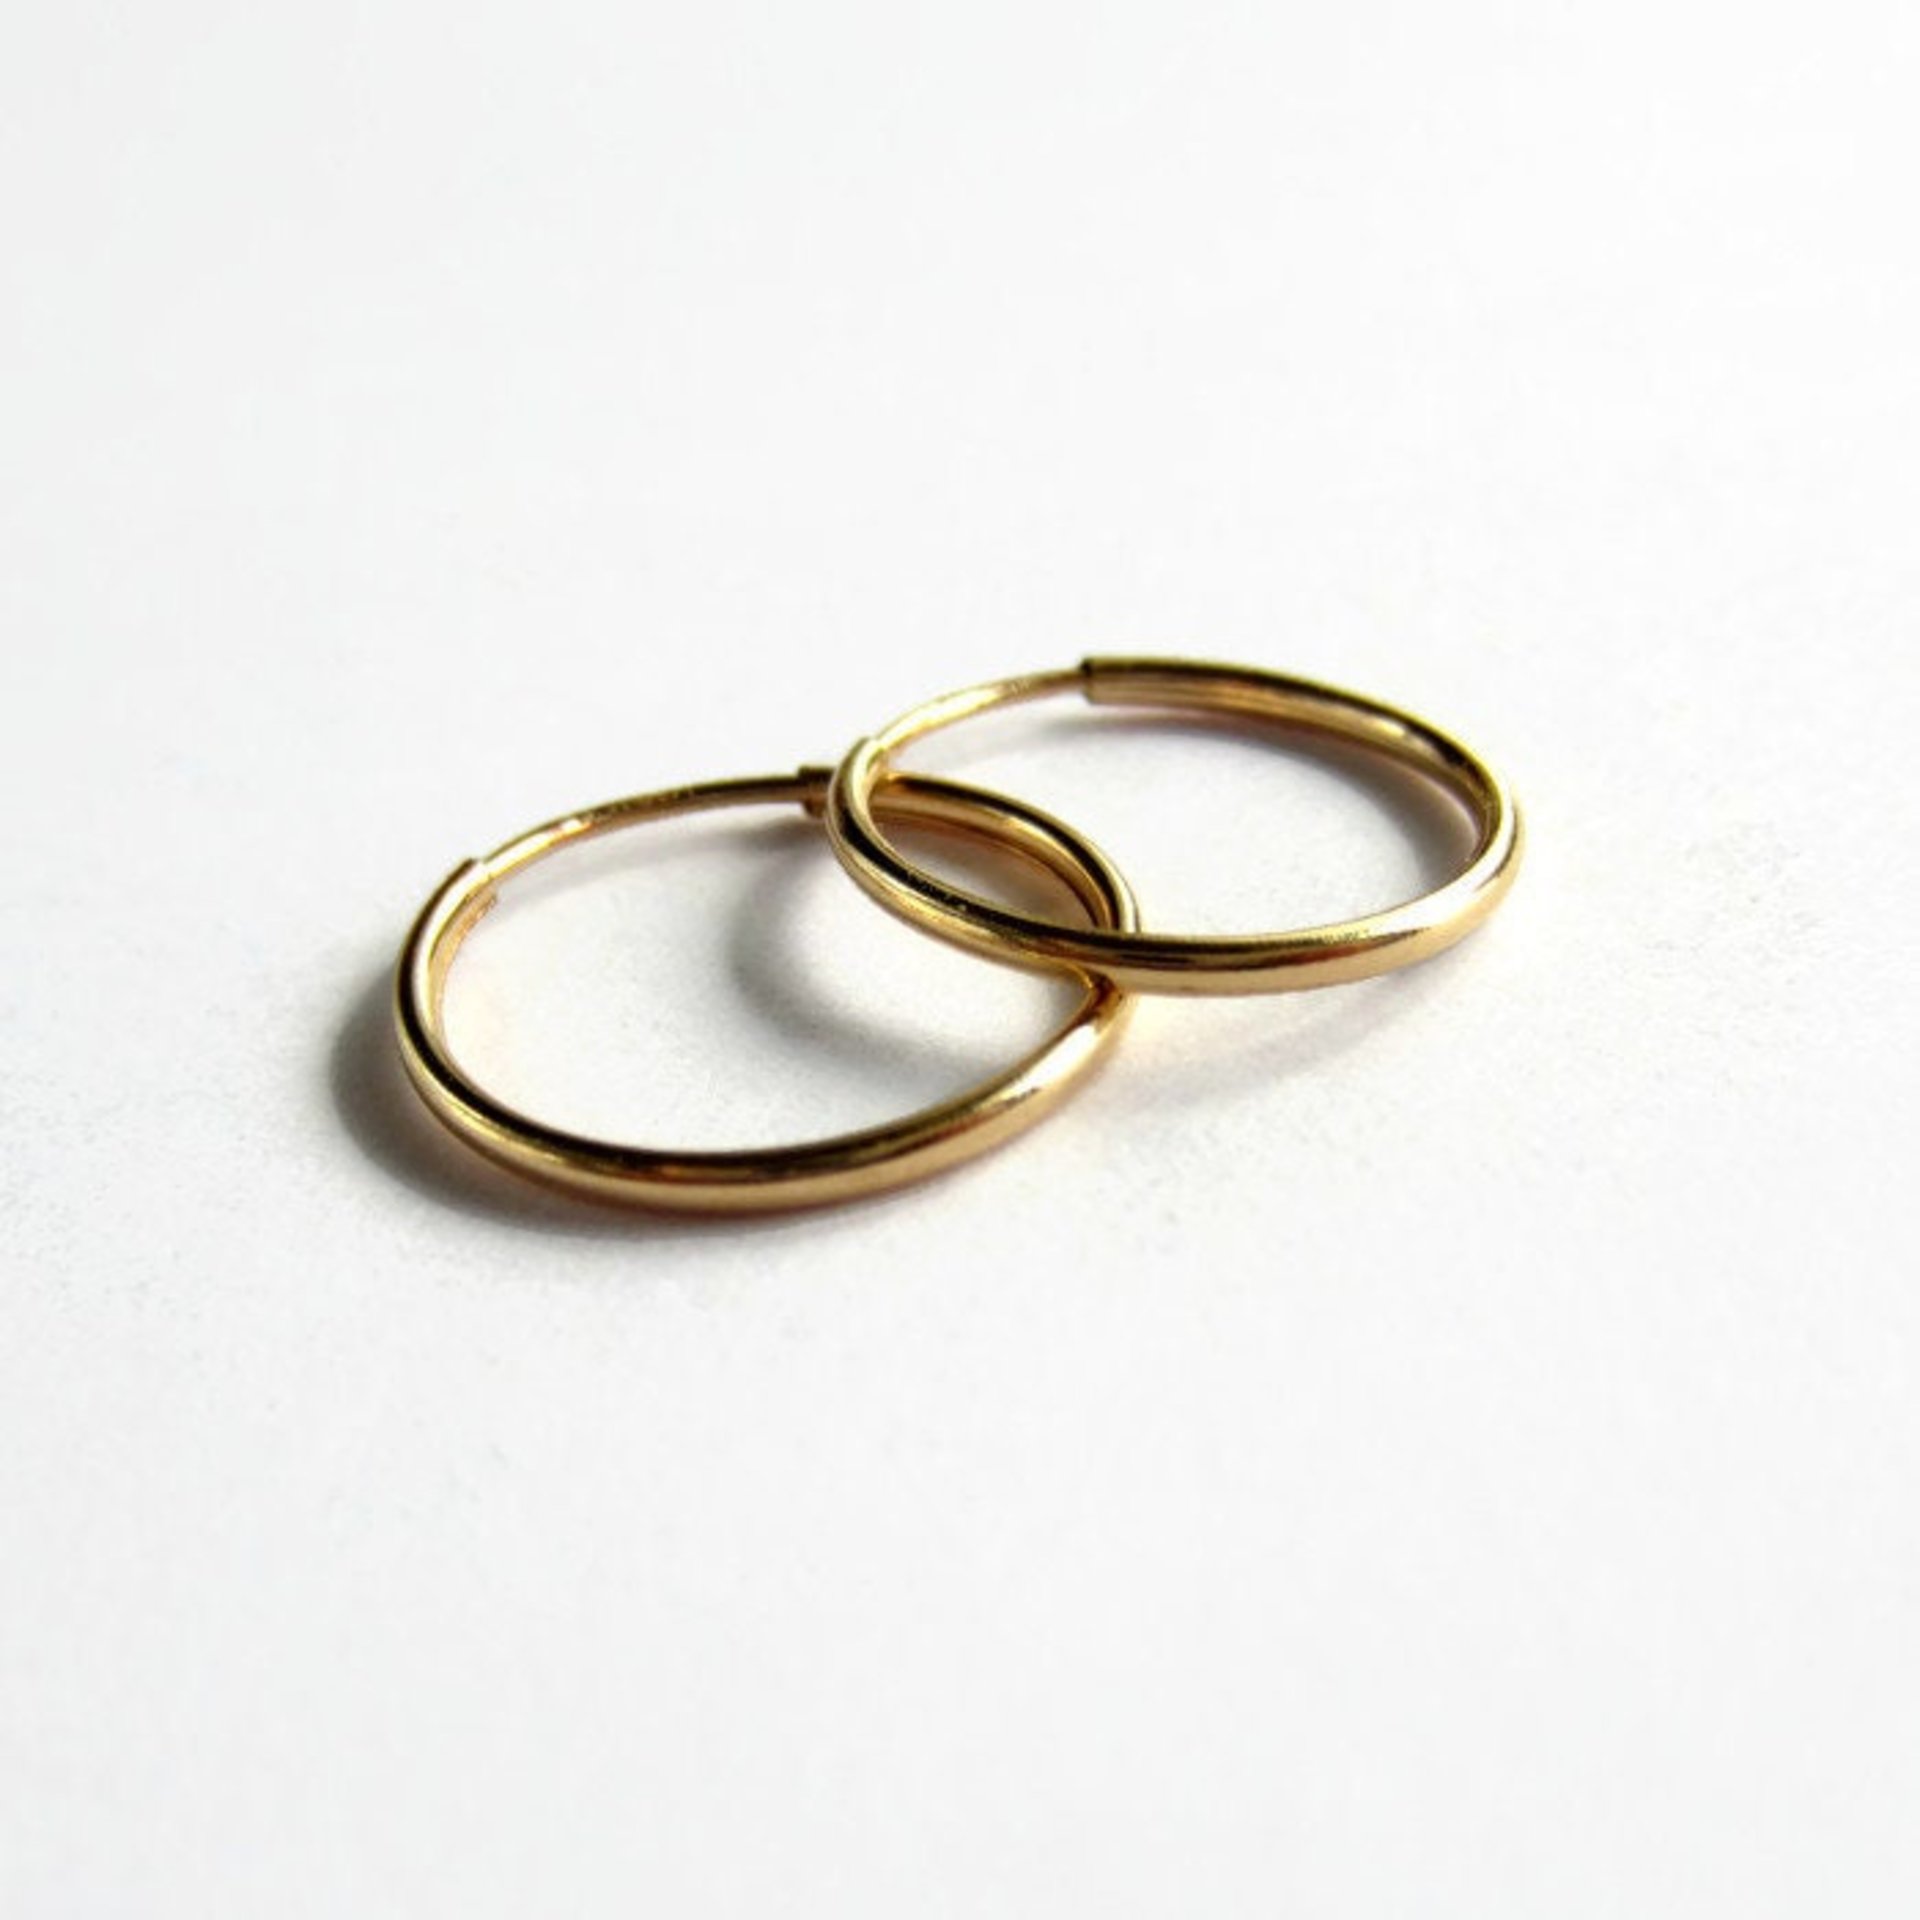 Single or Pair of 14K 20mm Gold Filled Hoop Earrings ~ The Tiny Tree Frog Jewellery